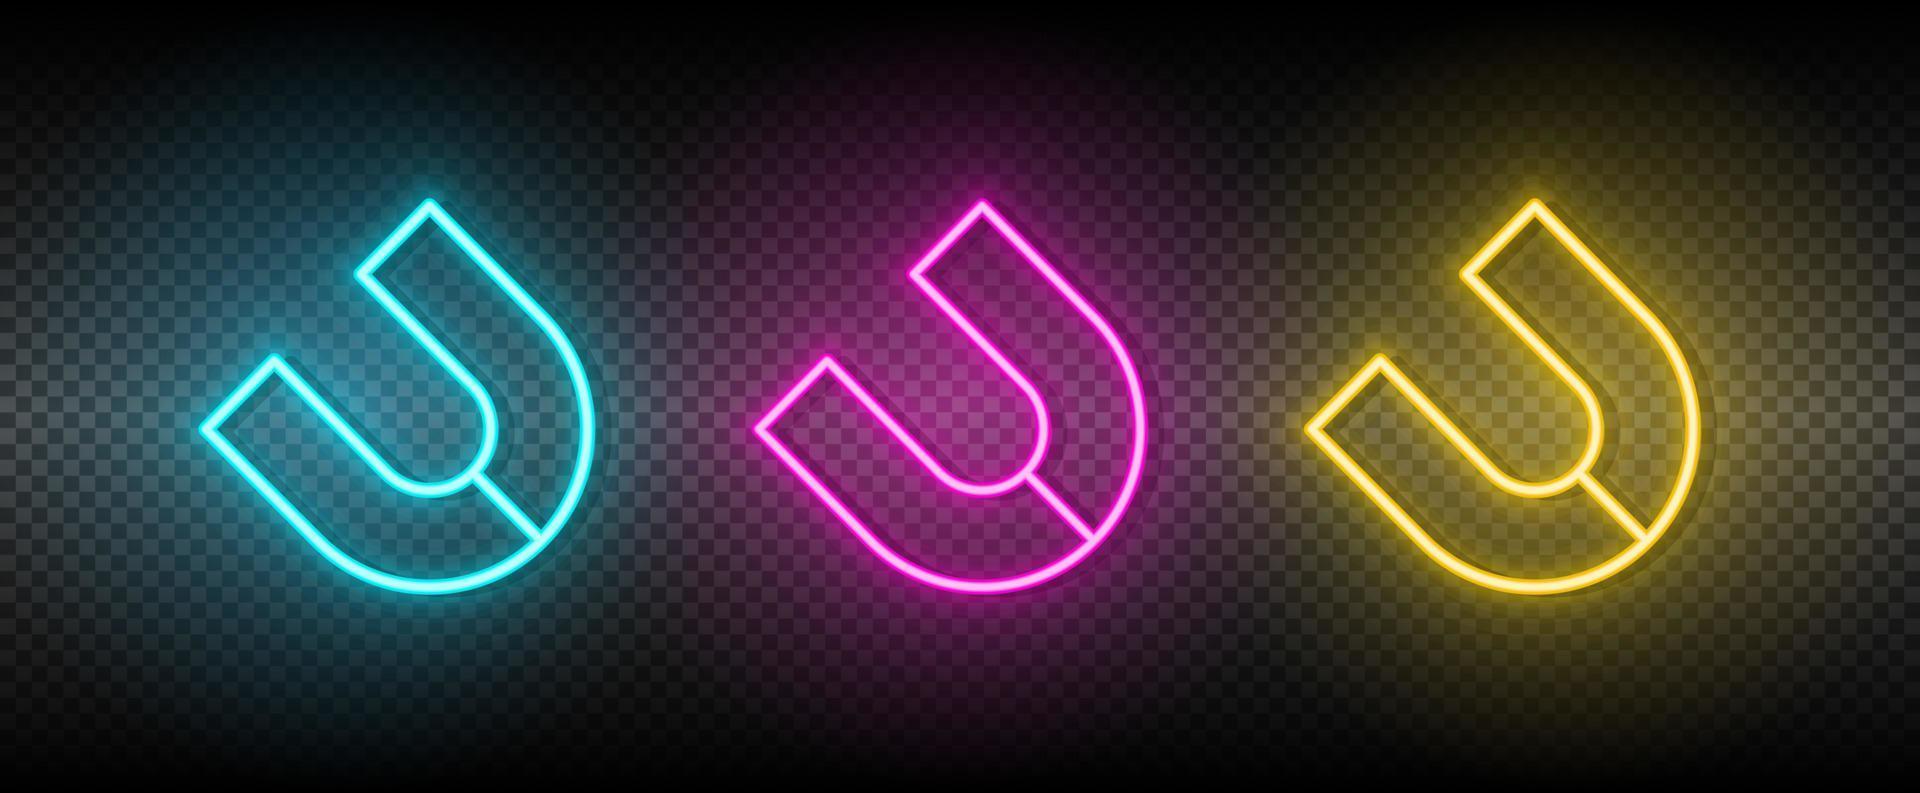 magnet vector icon yellow, pink, blue neon set. Tools vector icon on dark transparency background